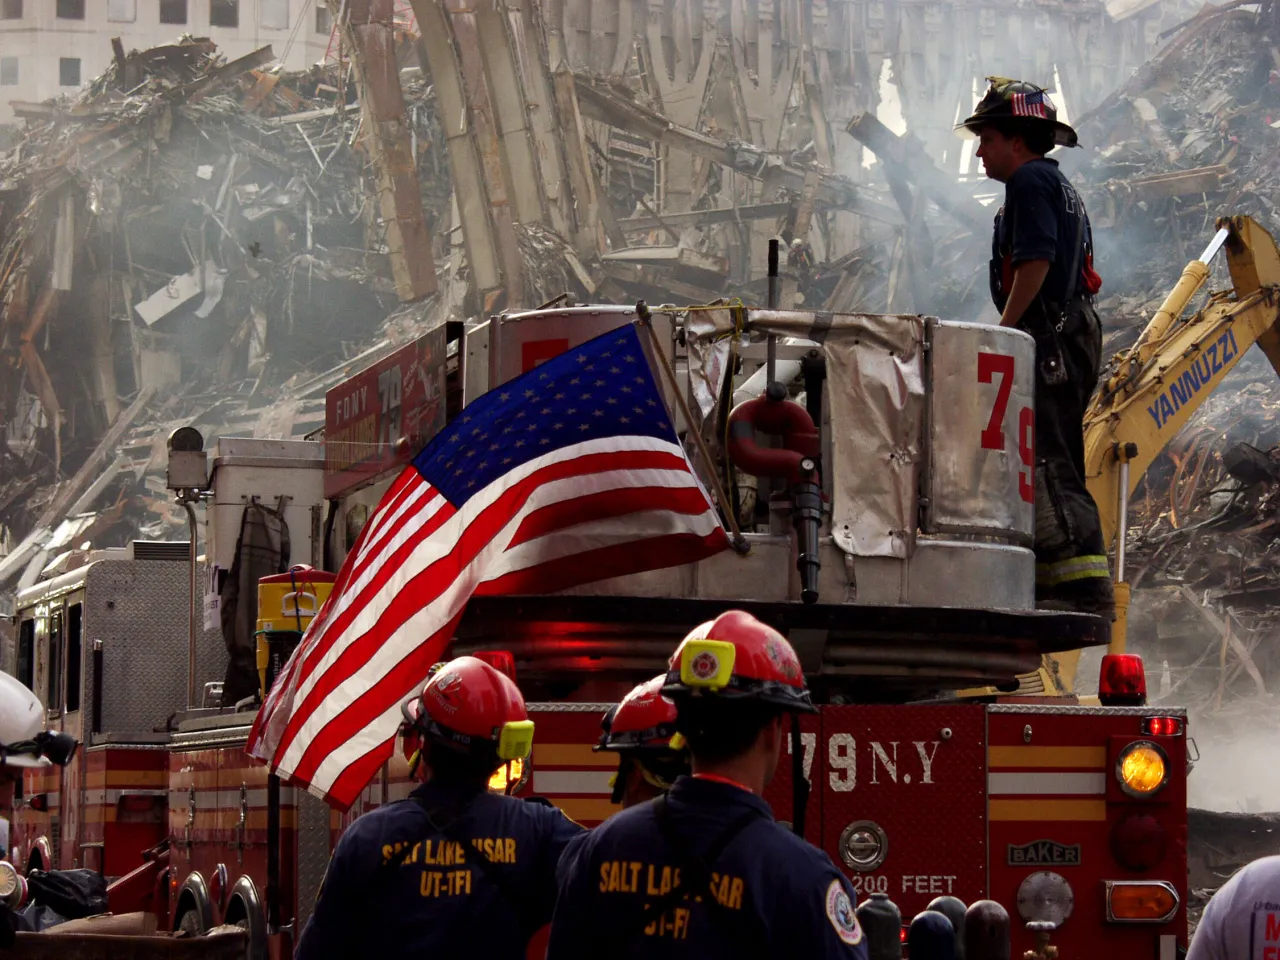 Image: 9/11 - Firefighters and Urban Search and Rescue teams prepare to enter Ground Zero